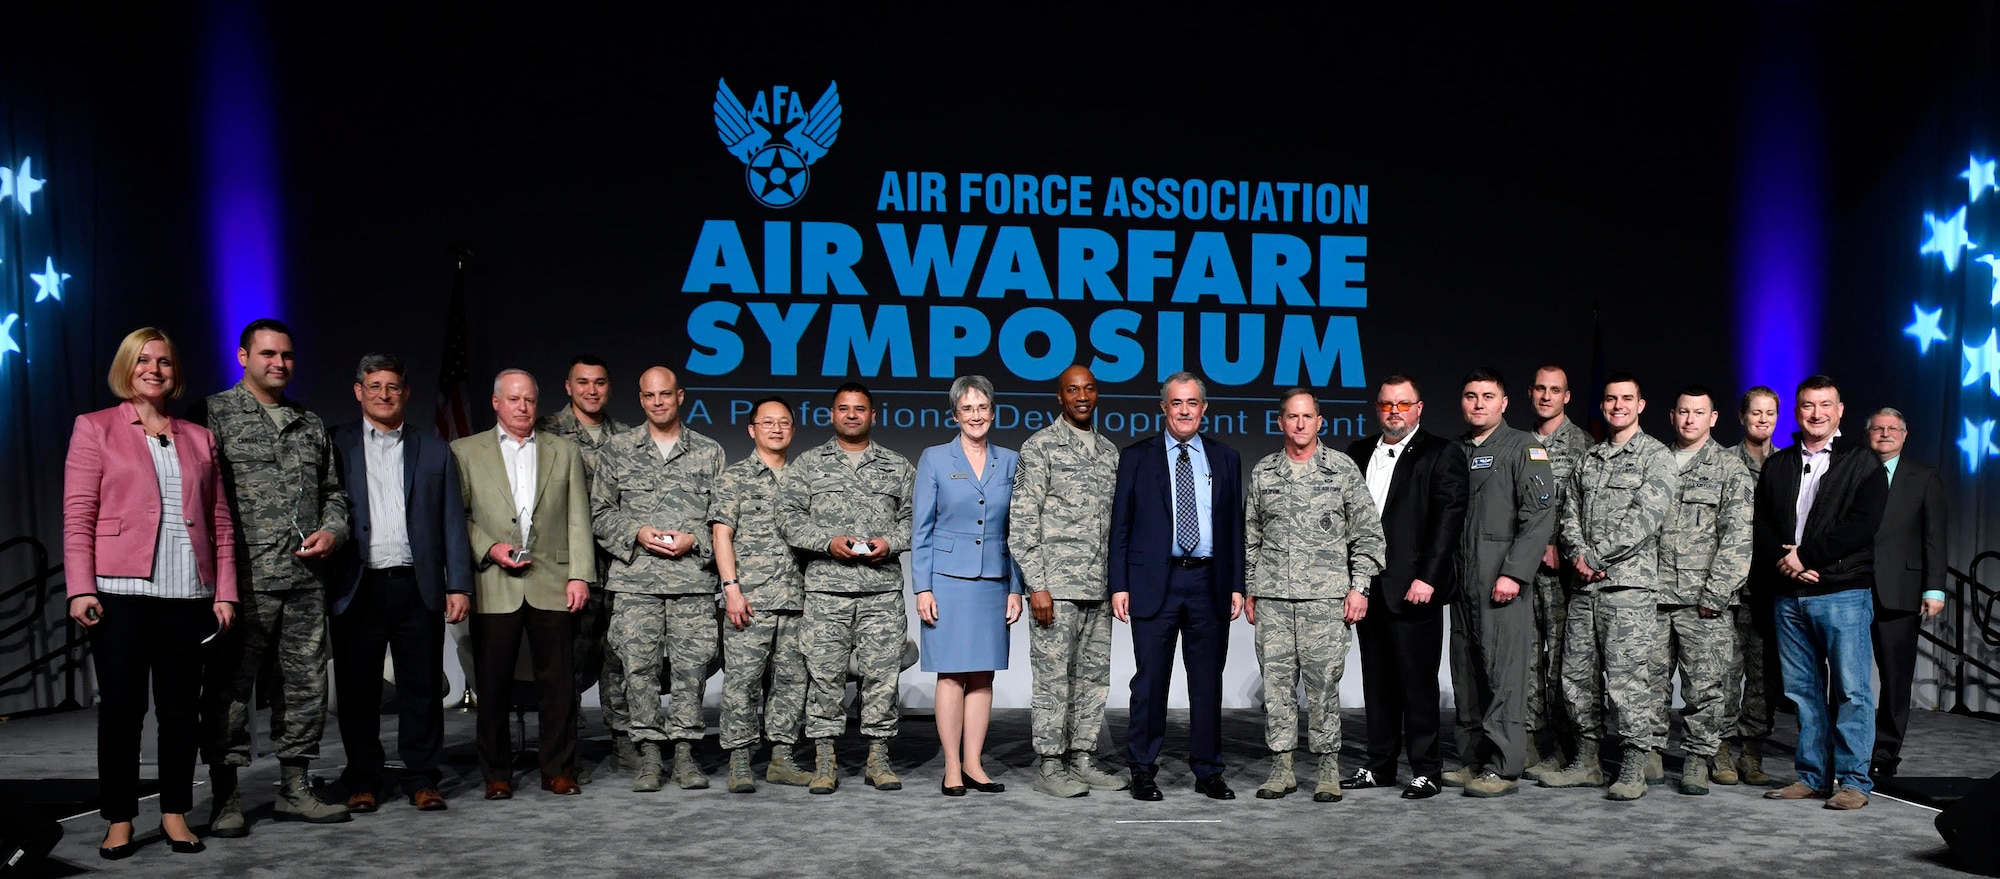 All Spark Tank finalists pose for a photo with members of the panel during the Air Force Association Air Warfare Symposium, Orlando, Fla., Feb. 22, 2018. (U.S. Air Force photo by Wayne A. Clark)